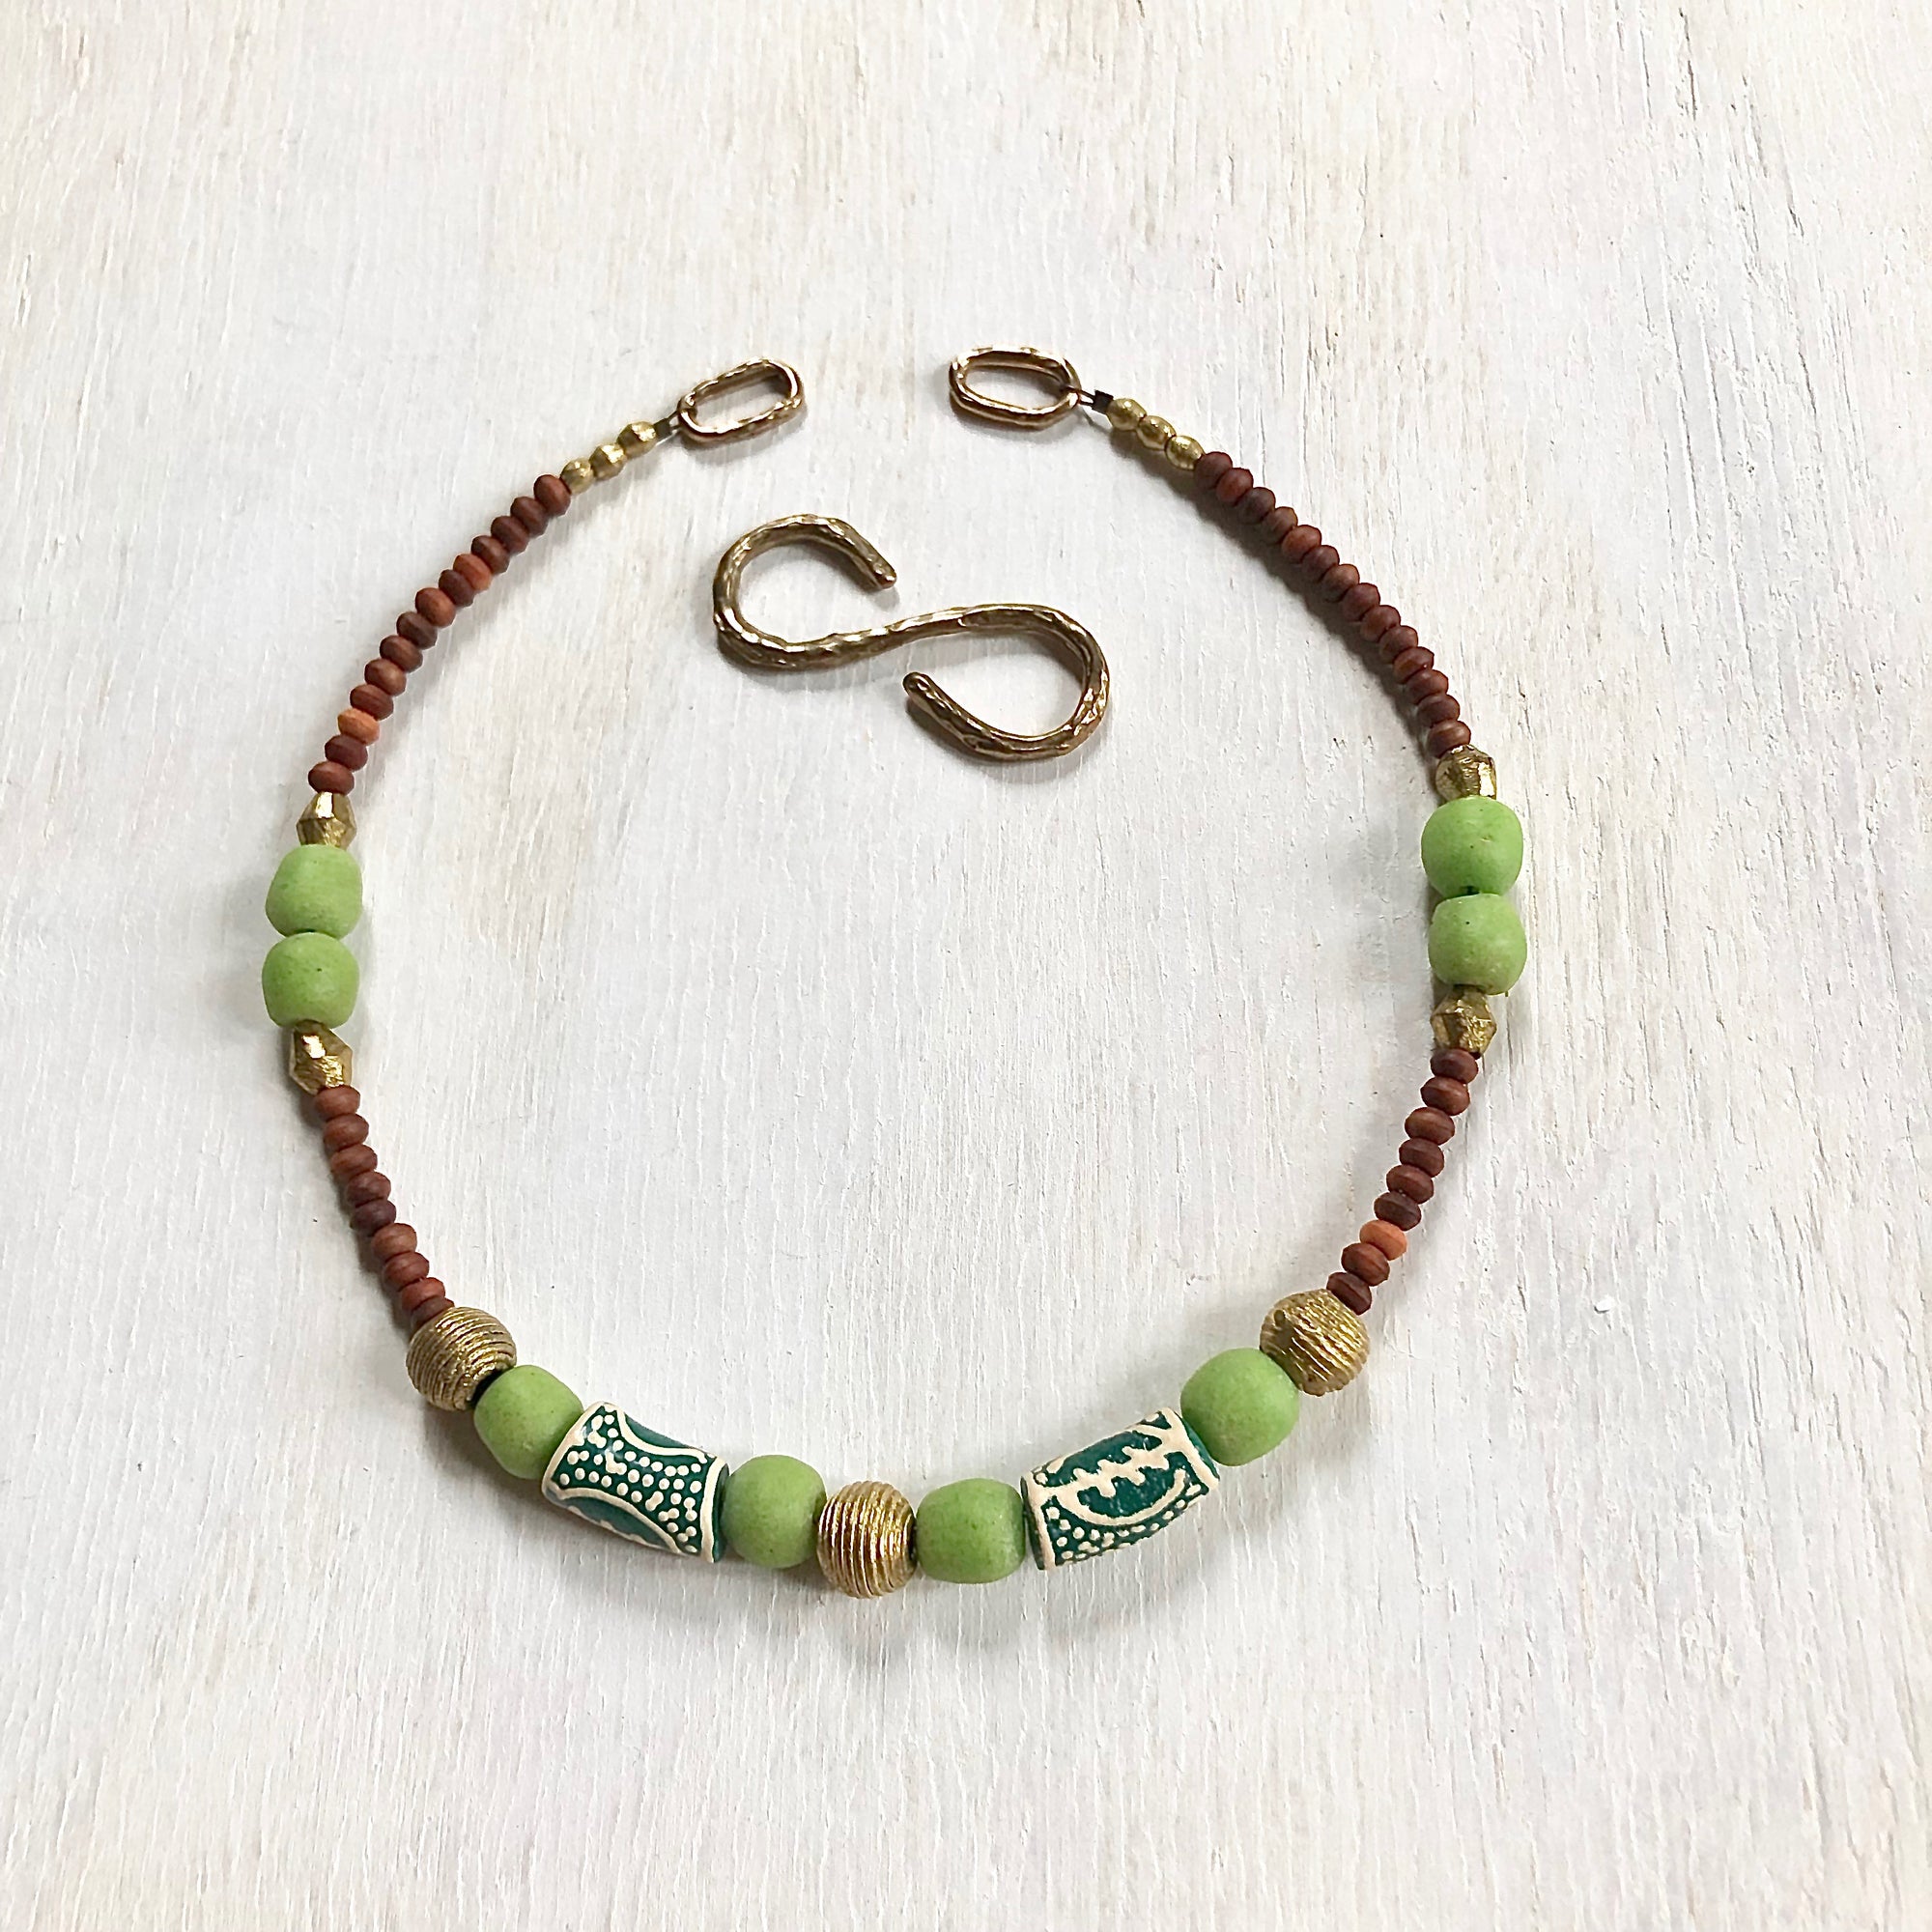 Hand painted green Adinkra African beads with vintage olive wood pendant long necklace. Cristina Tamames Jewelry Designer